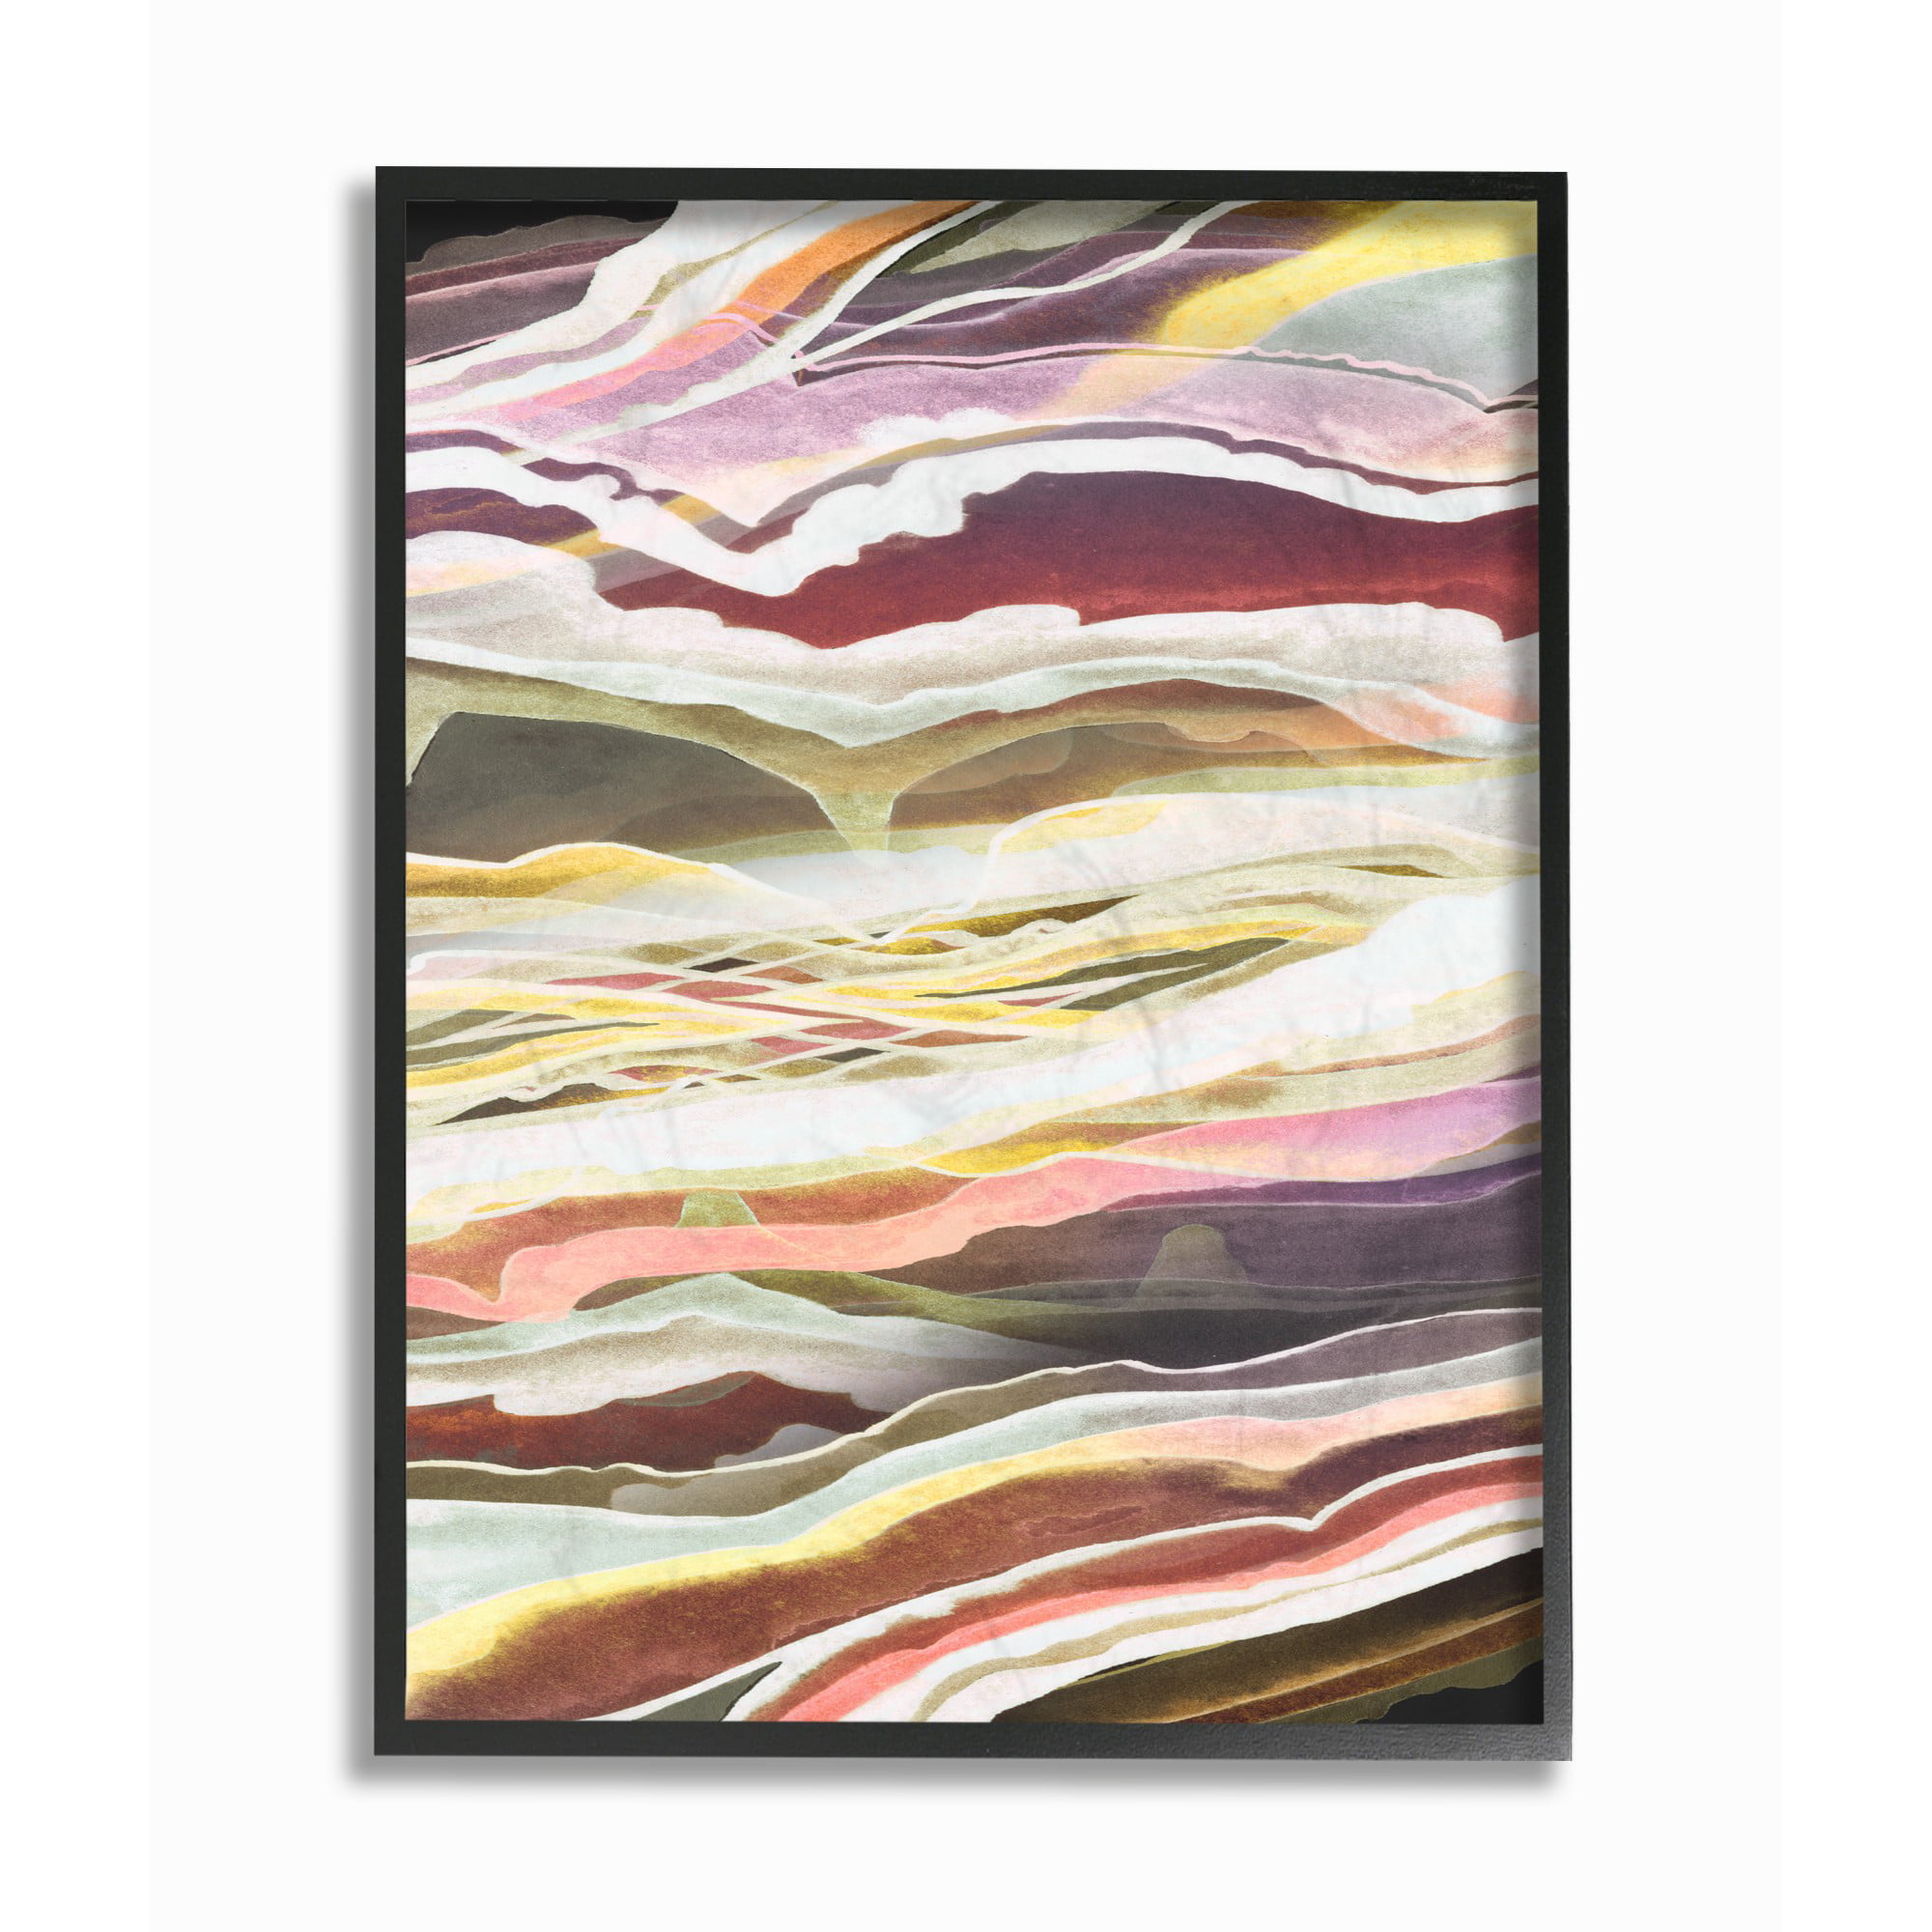 The Stupell Home Decor Deep Purple Ink Ocean Waves Abstract Paining Framed Giclee Texturized Art 24 x 30 Multi-Color